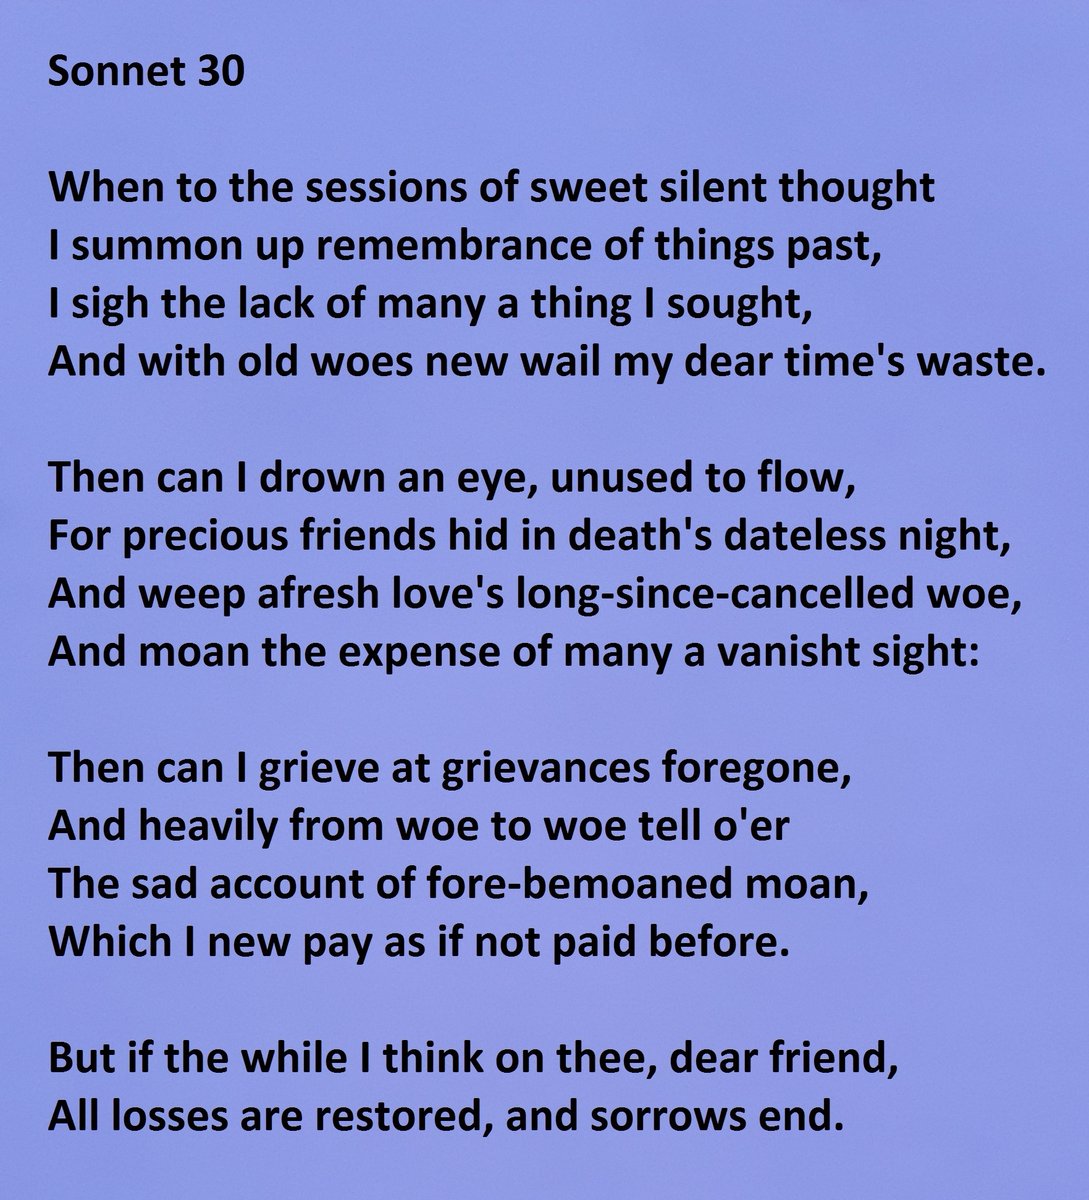 Sonnet 30 by William Shakespeare "When to the sessions of sweet silent thought"